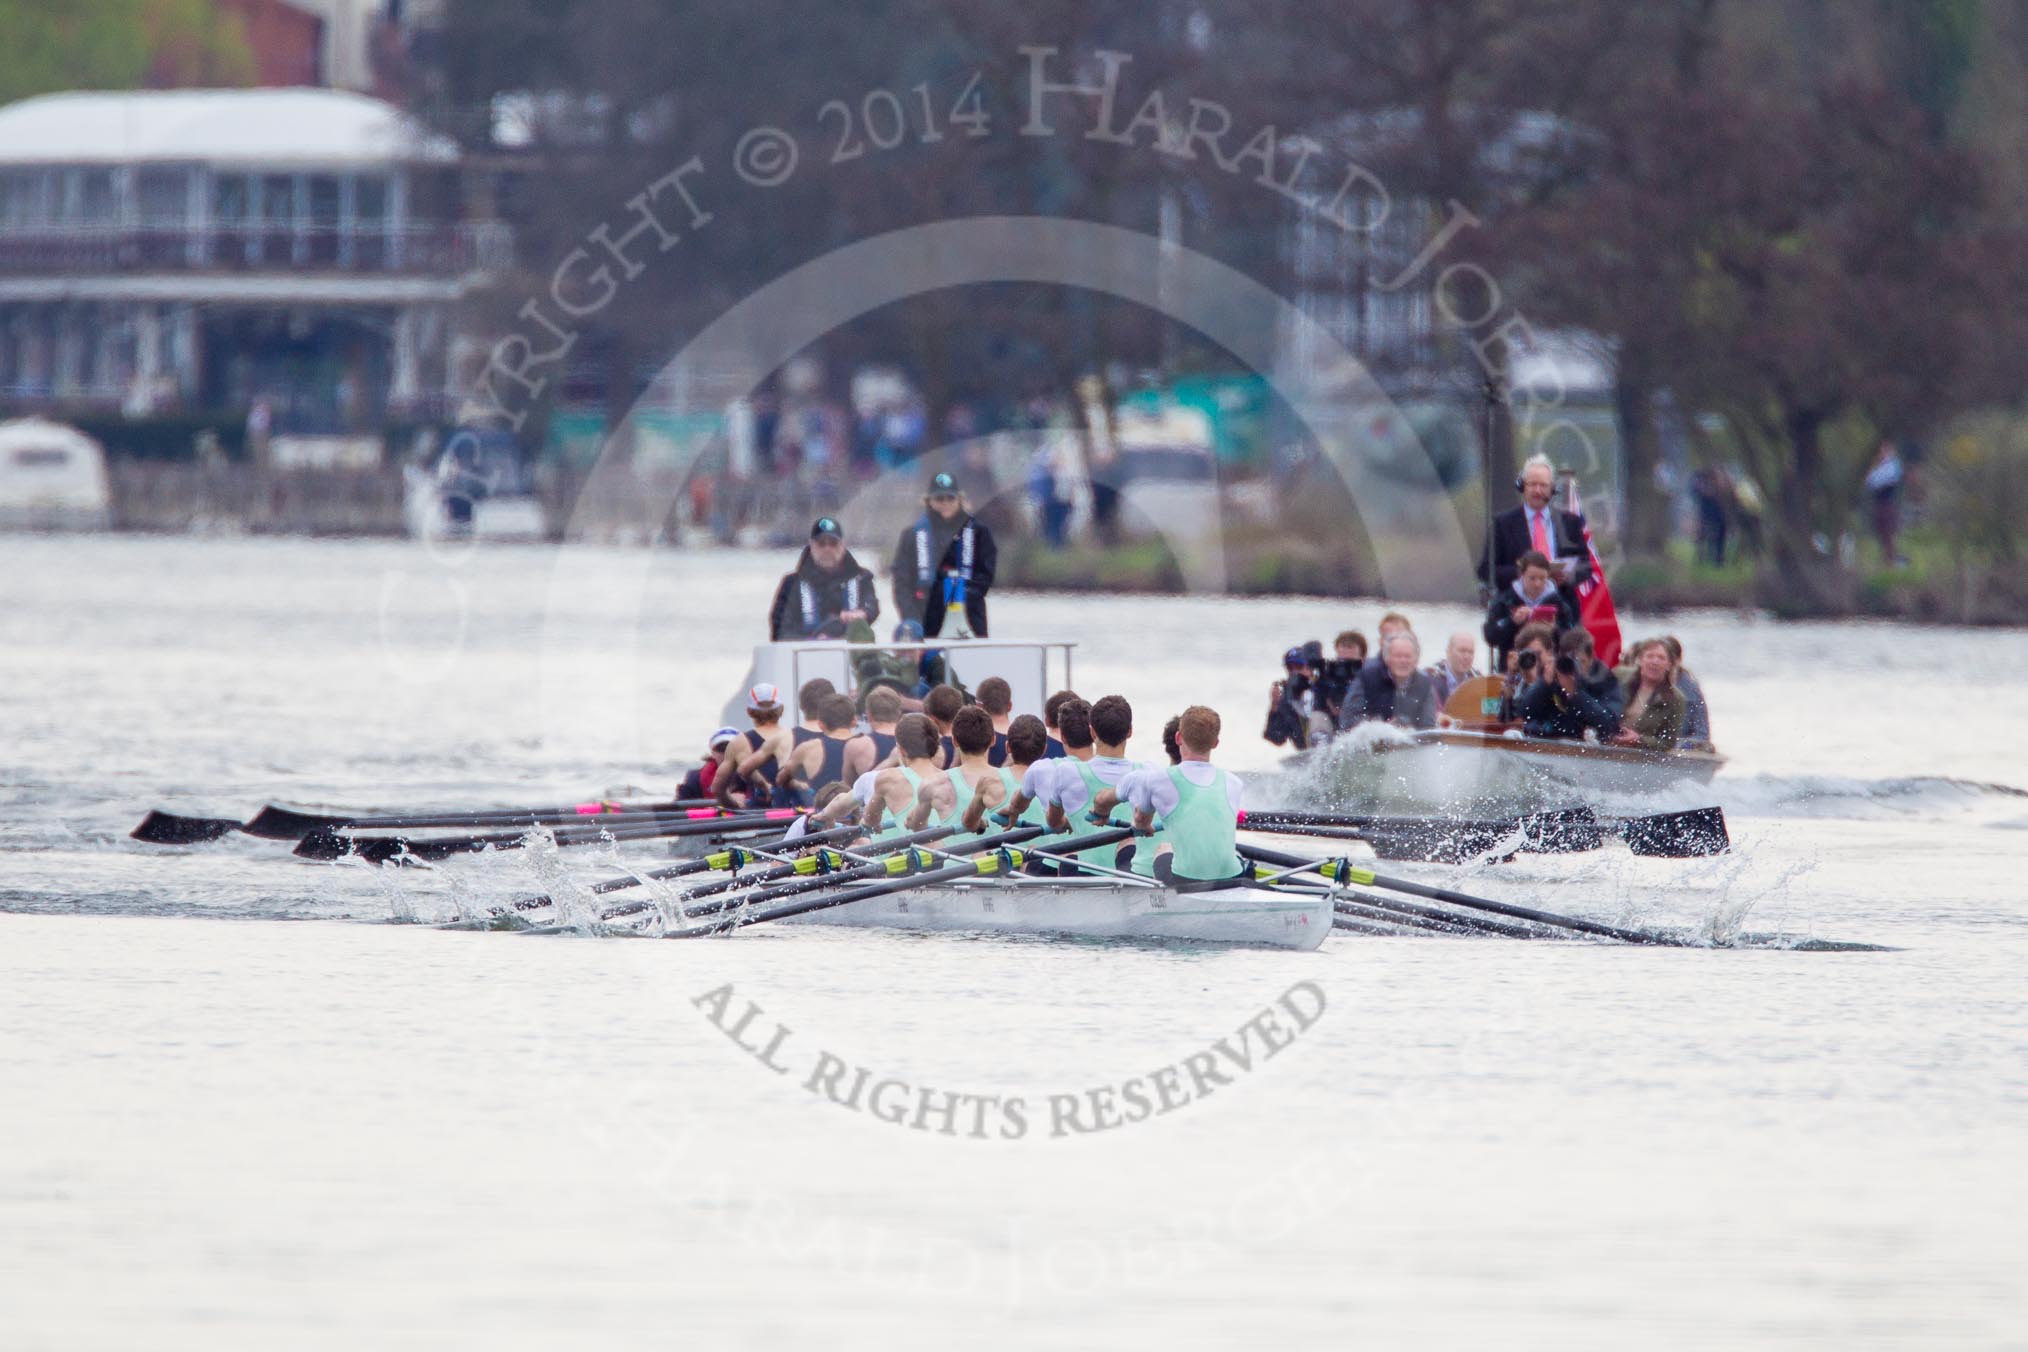 The Women's Boat Race and Henley Boat Races 2014: The Lightweight Men's Boat Race - OULRC vs CULRC, Oxford is on the right (Bucks) side, behind the boats is the umpire's launch, on the right the press boat..
River Thames,
Henley-on-Thames,
Buckinghamshire,
United Kingdom,
on 30 March 2014 at 15:39, image #362